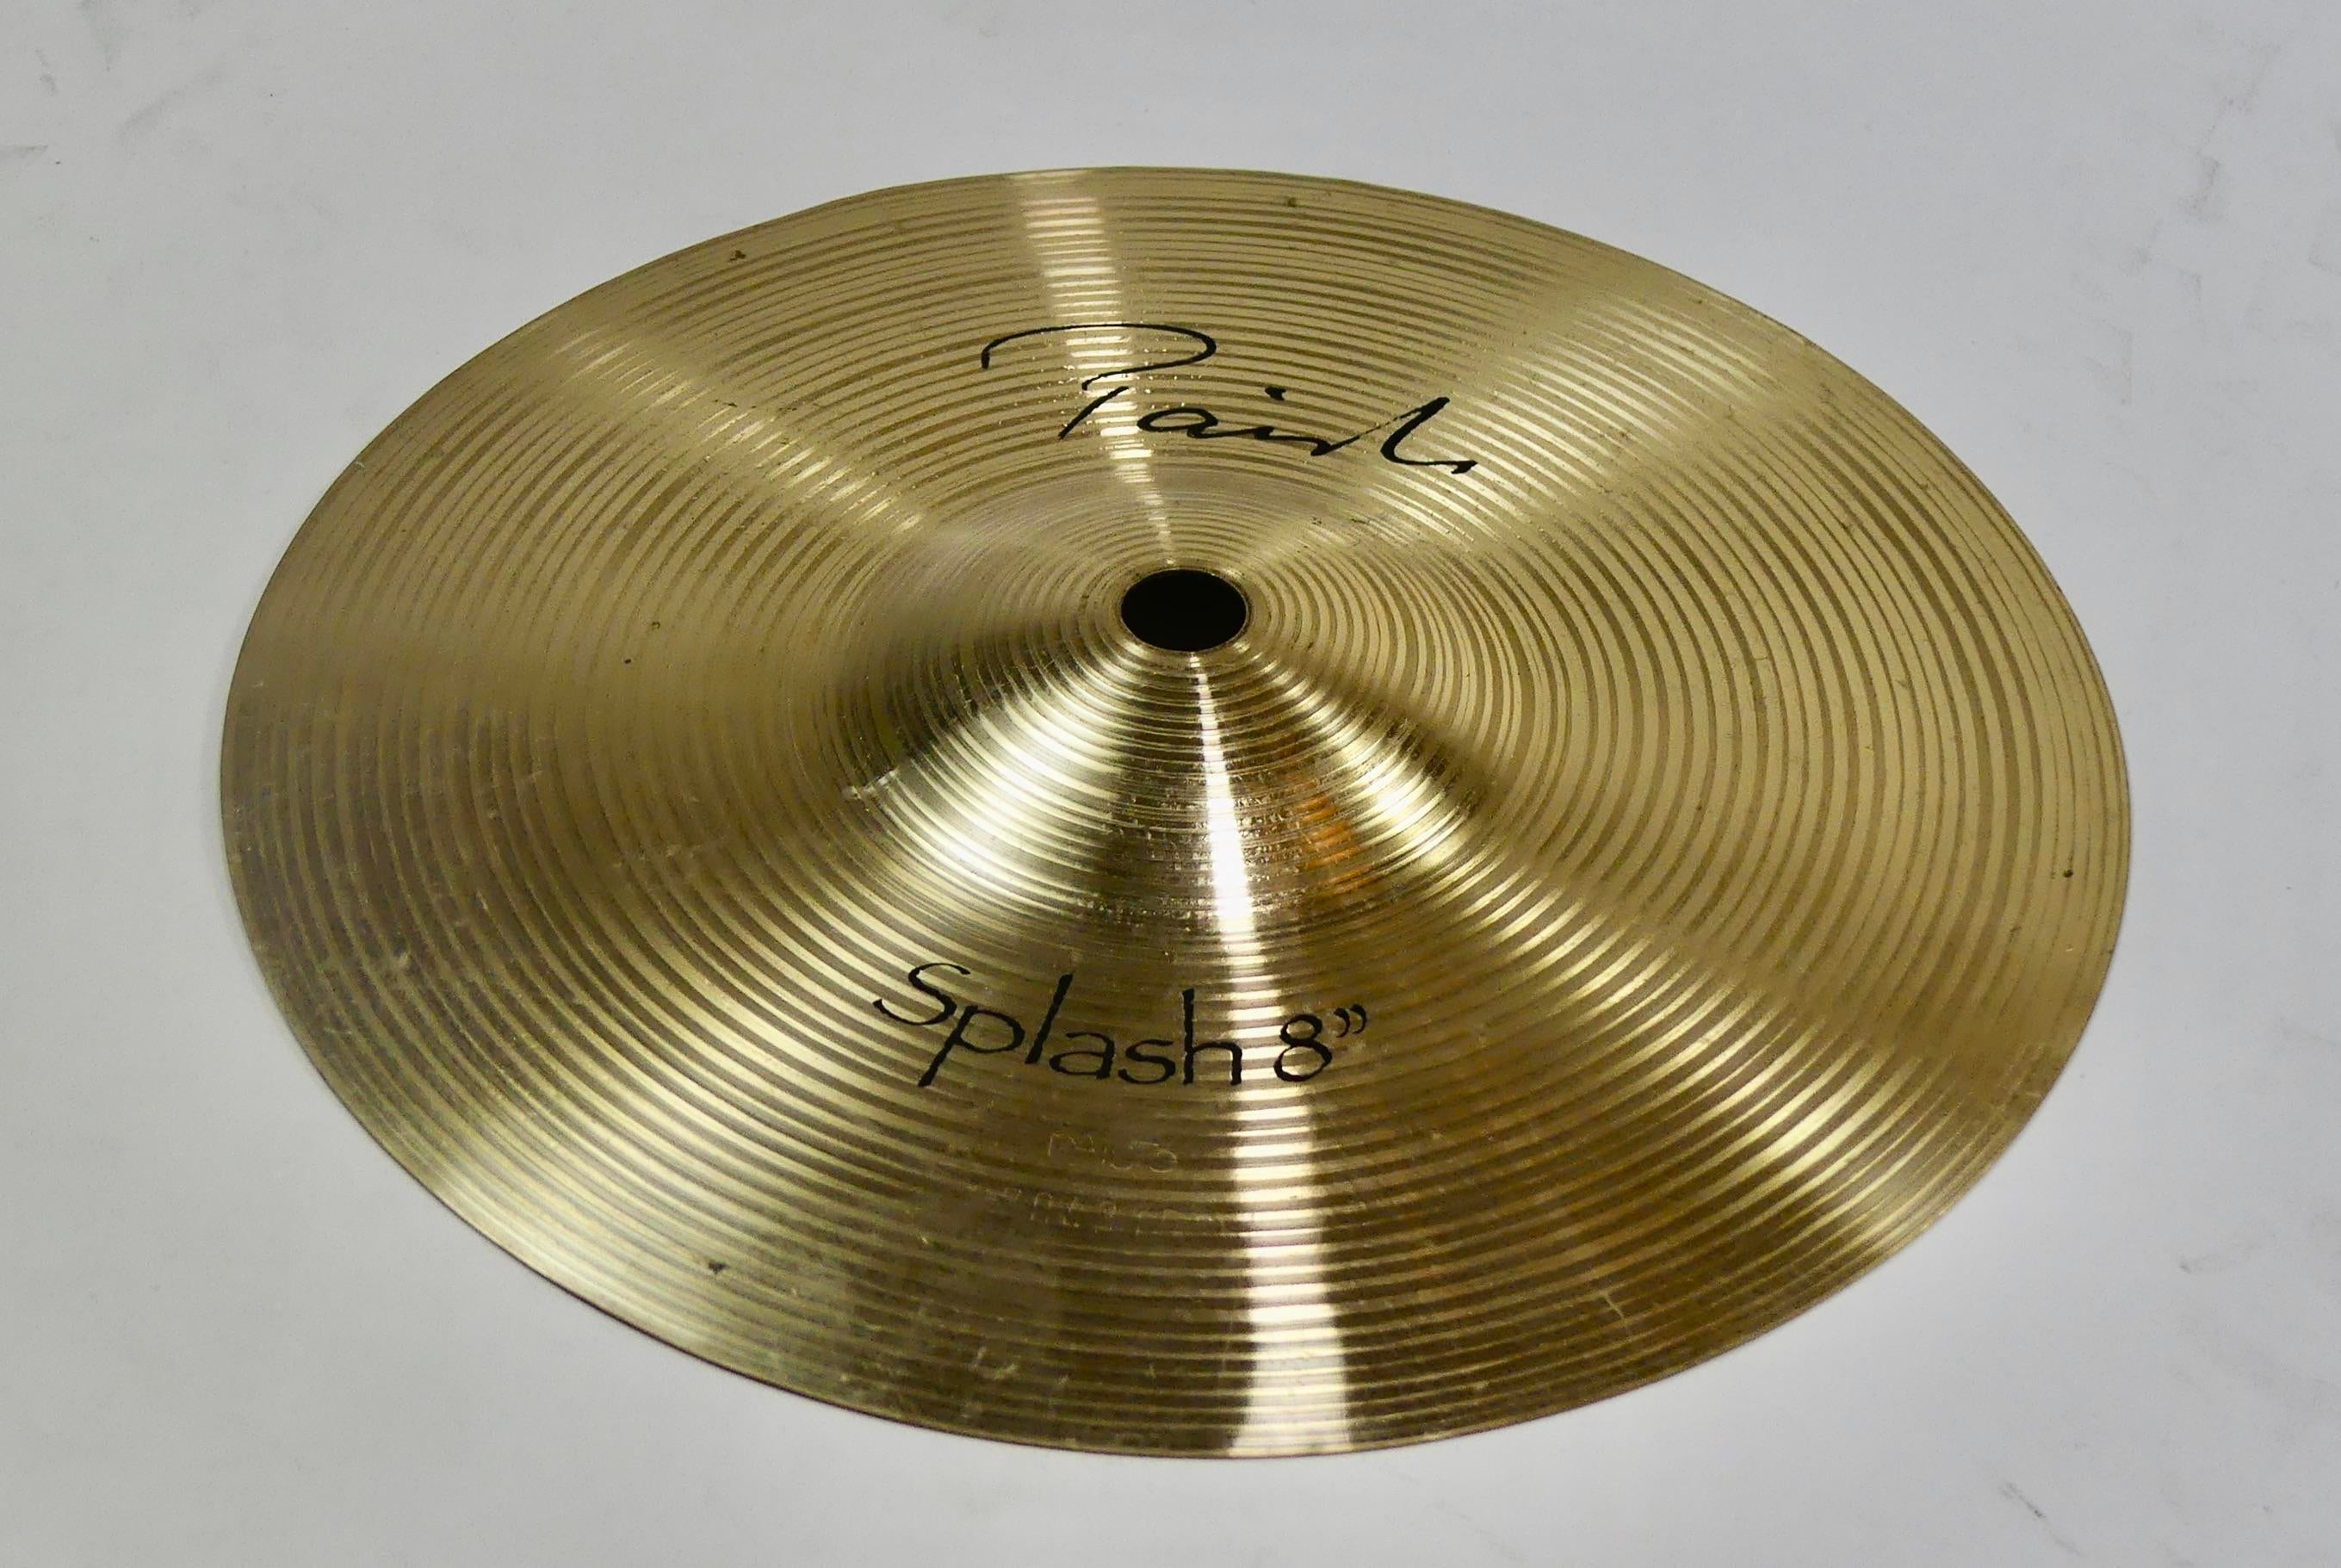 Used Paiste 8 inch Signature Splash Cymbal - Sweetwater's Gear